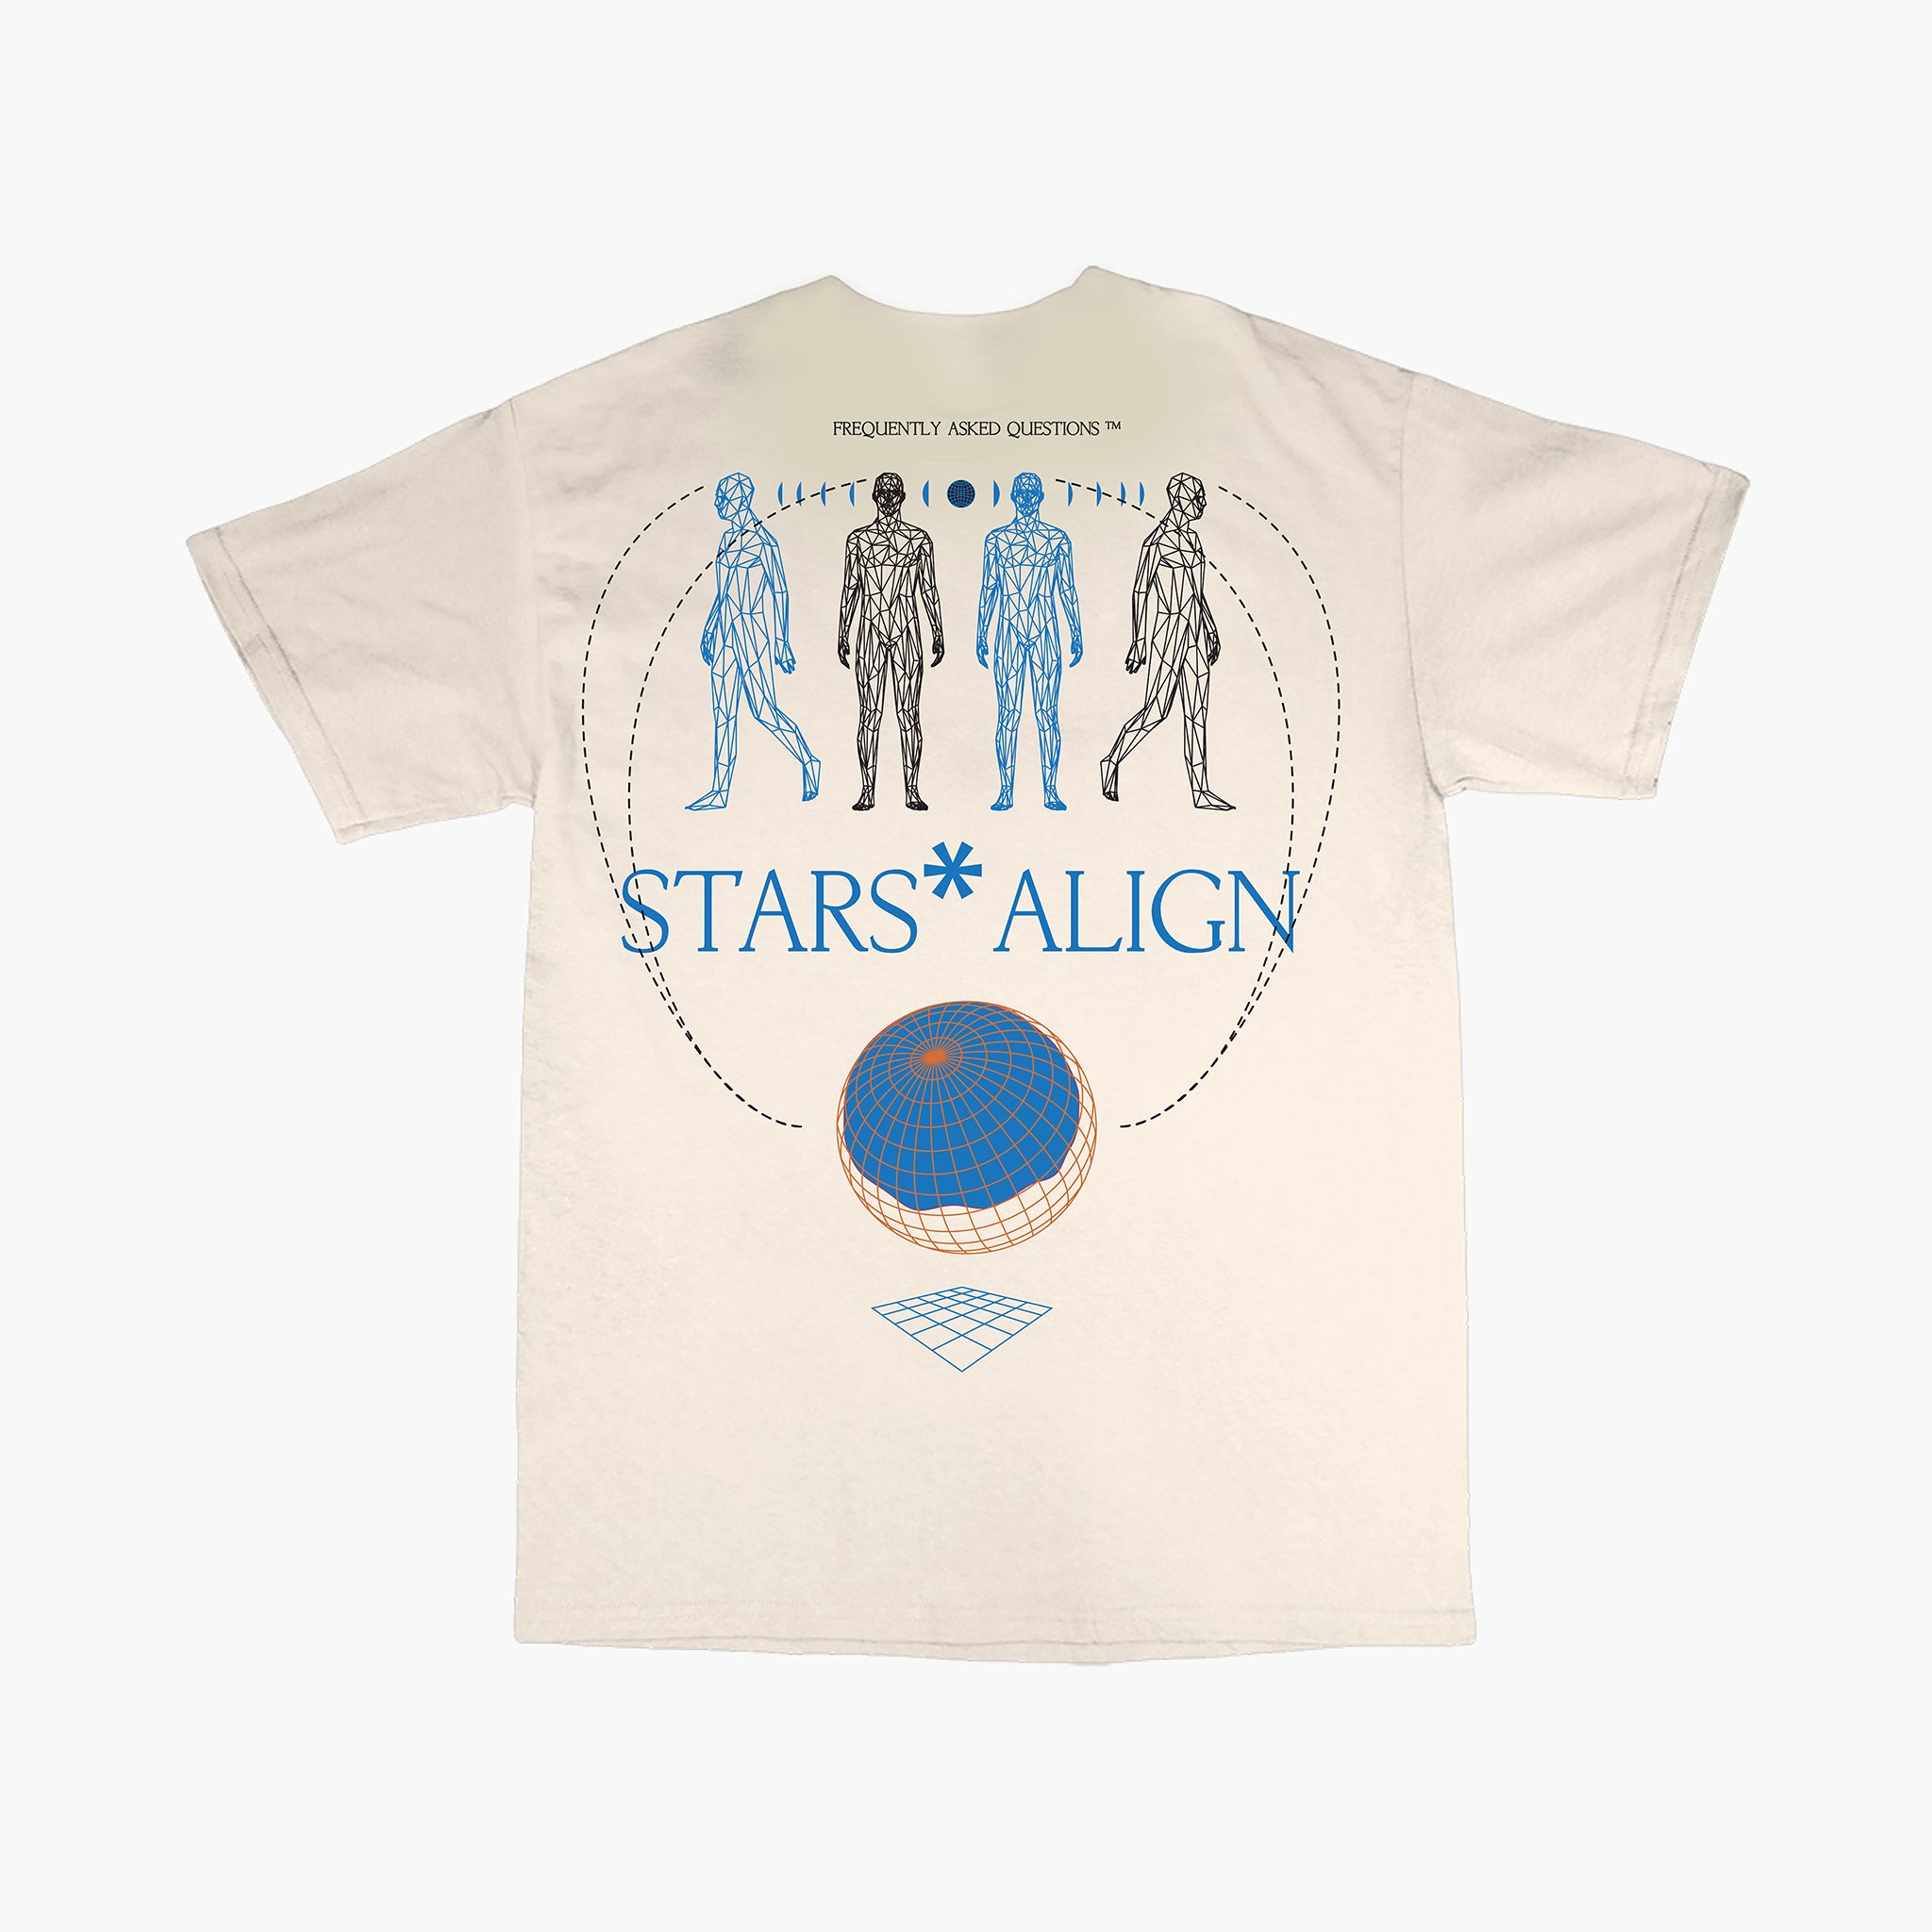 Stars Align T-Shirt - Frequently Asked Questions